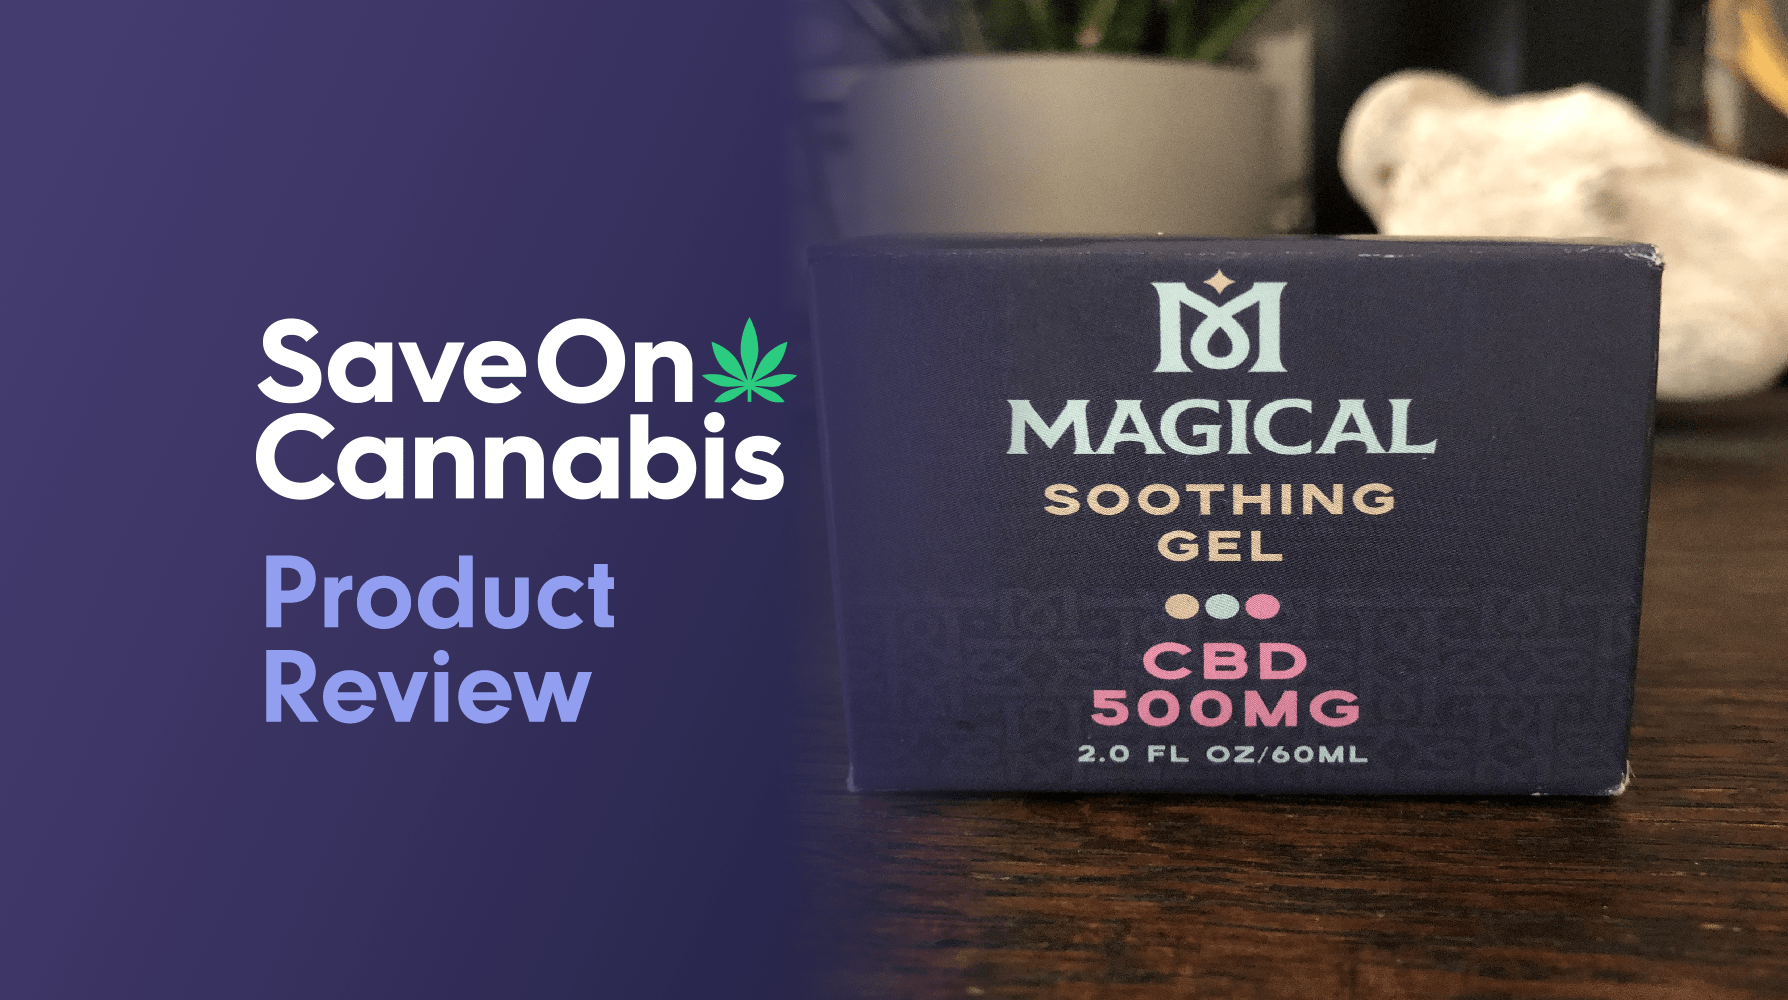 Magical CBD Soothing Gel Save On Cannabis Review Website